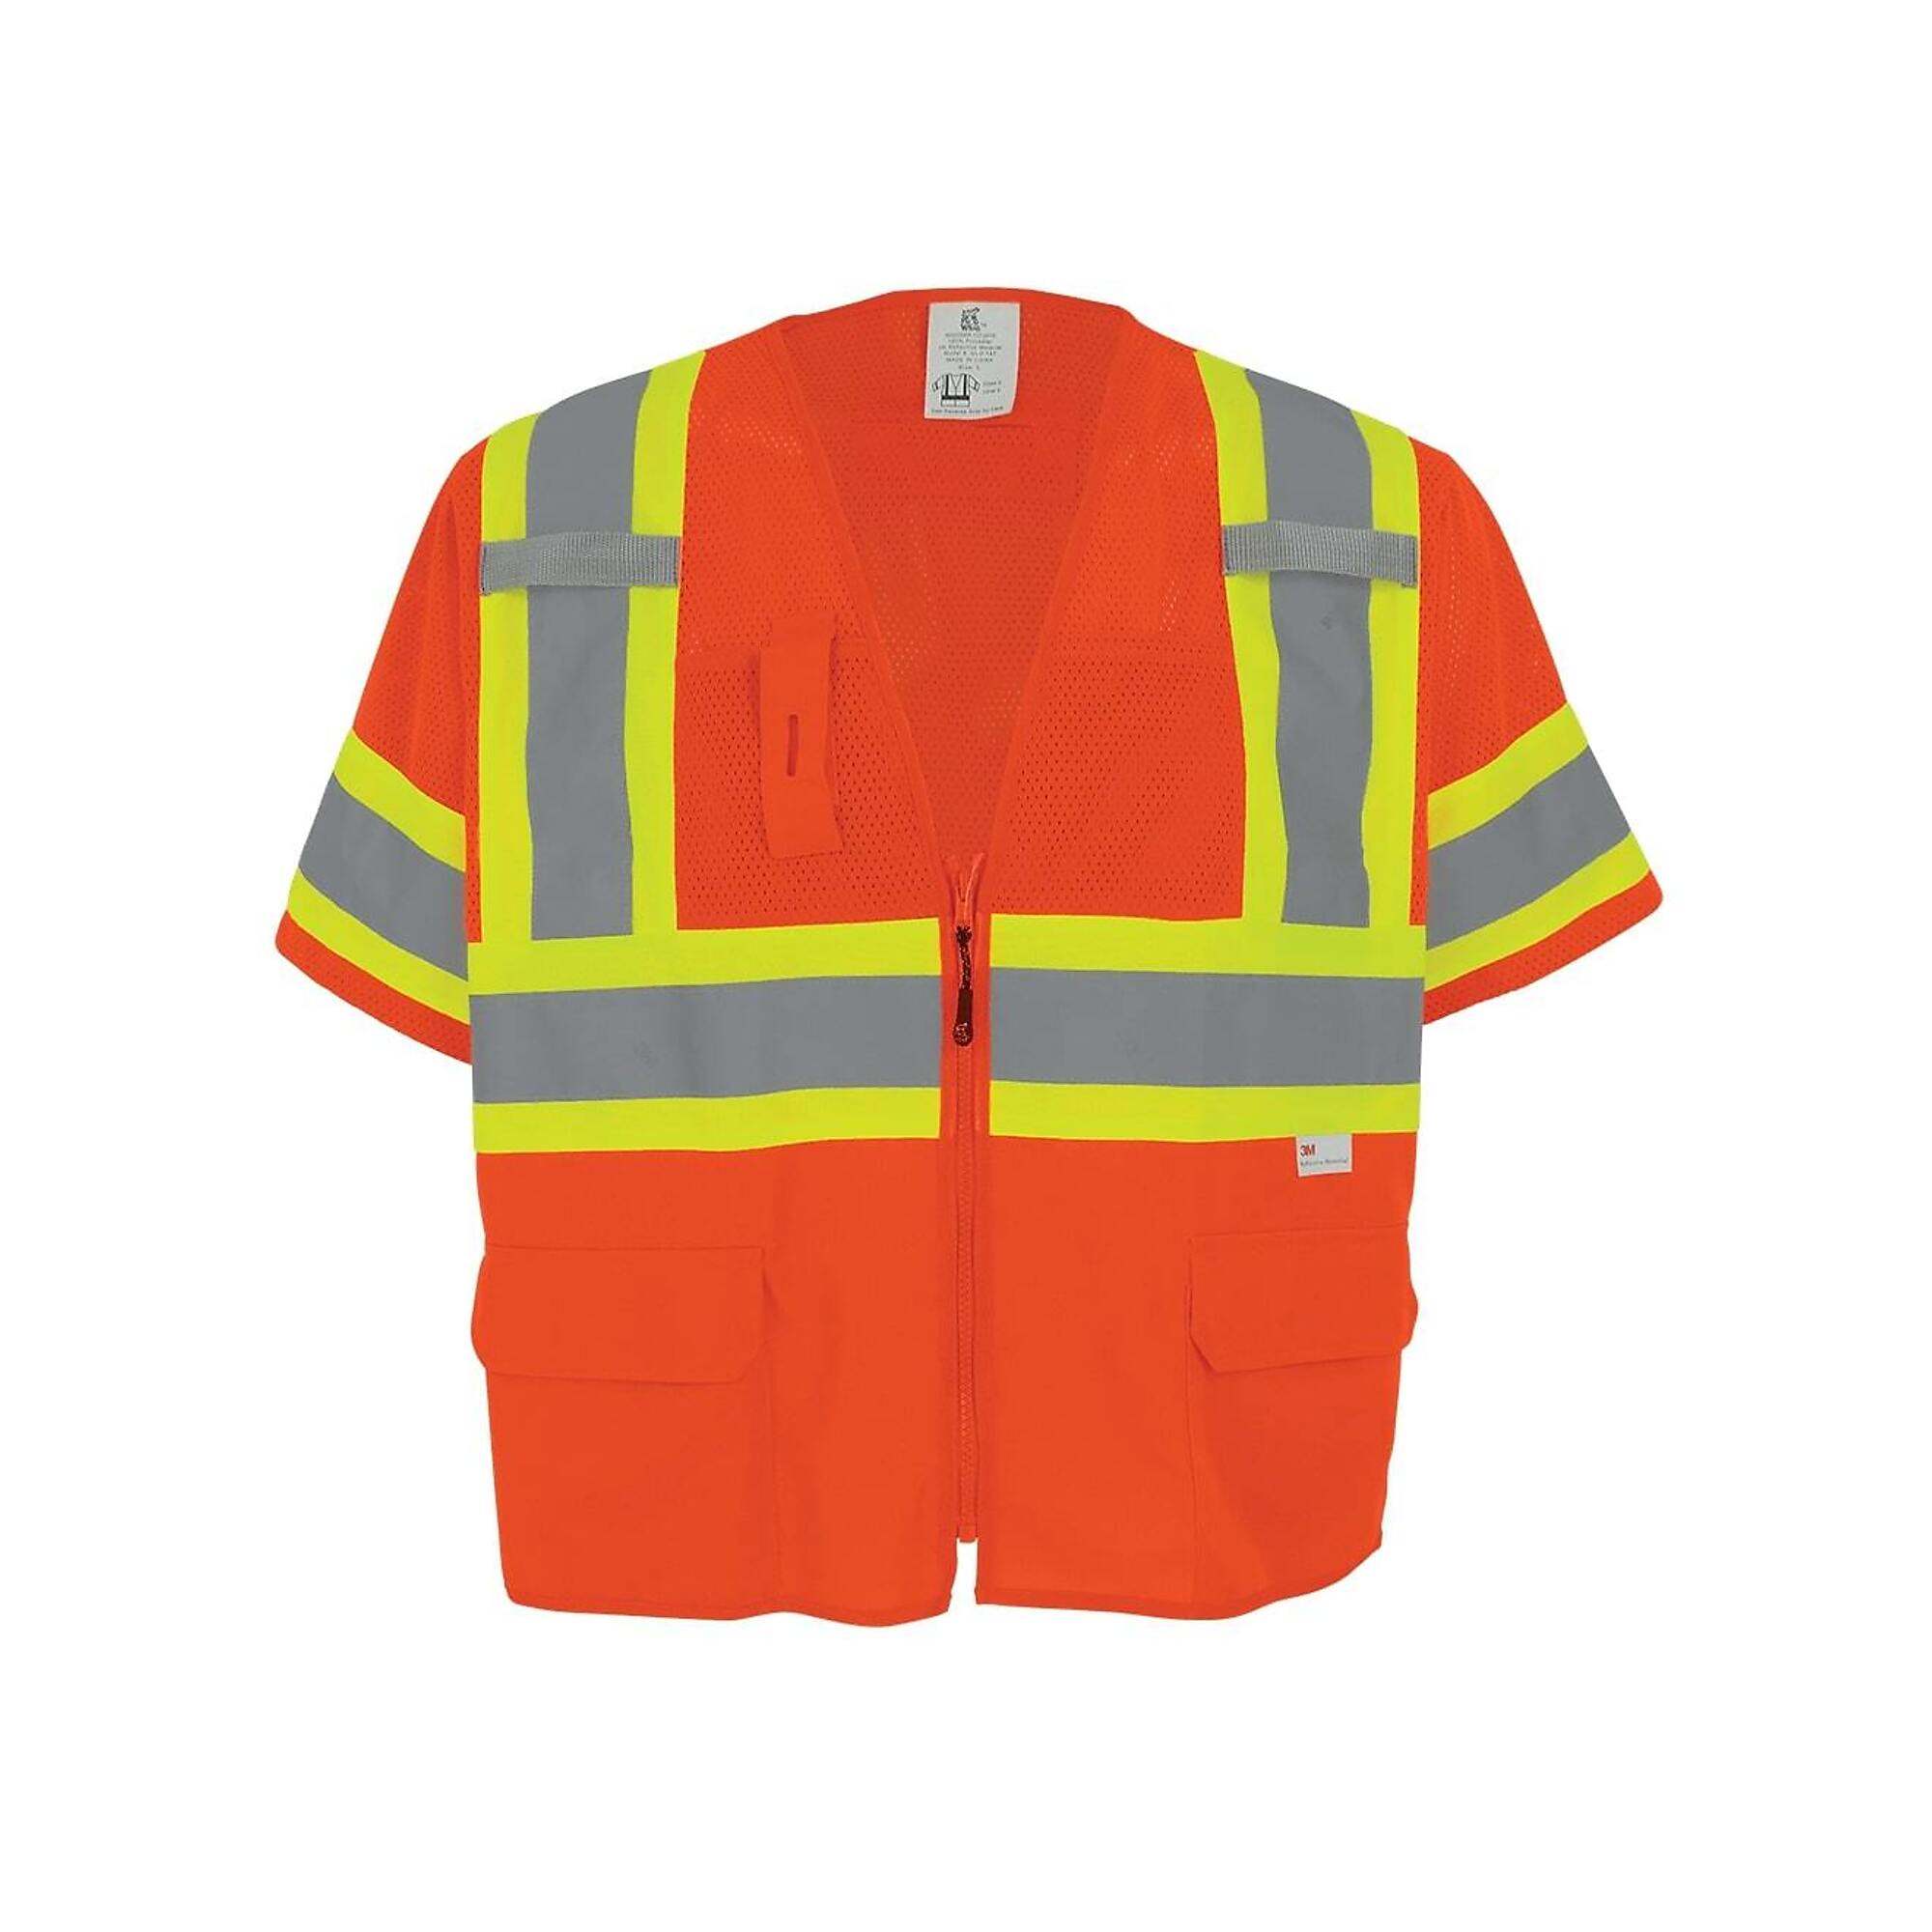 FrogWear, HV Orange, Class 3 6 Pockets, With Sleeves Solid/Mesh Vest, Size 3XL, Color High-Visibility Orange, Model GLO-147-3XL